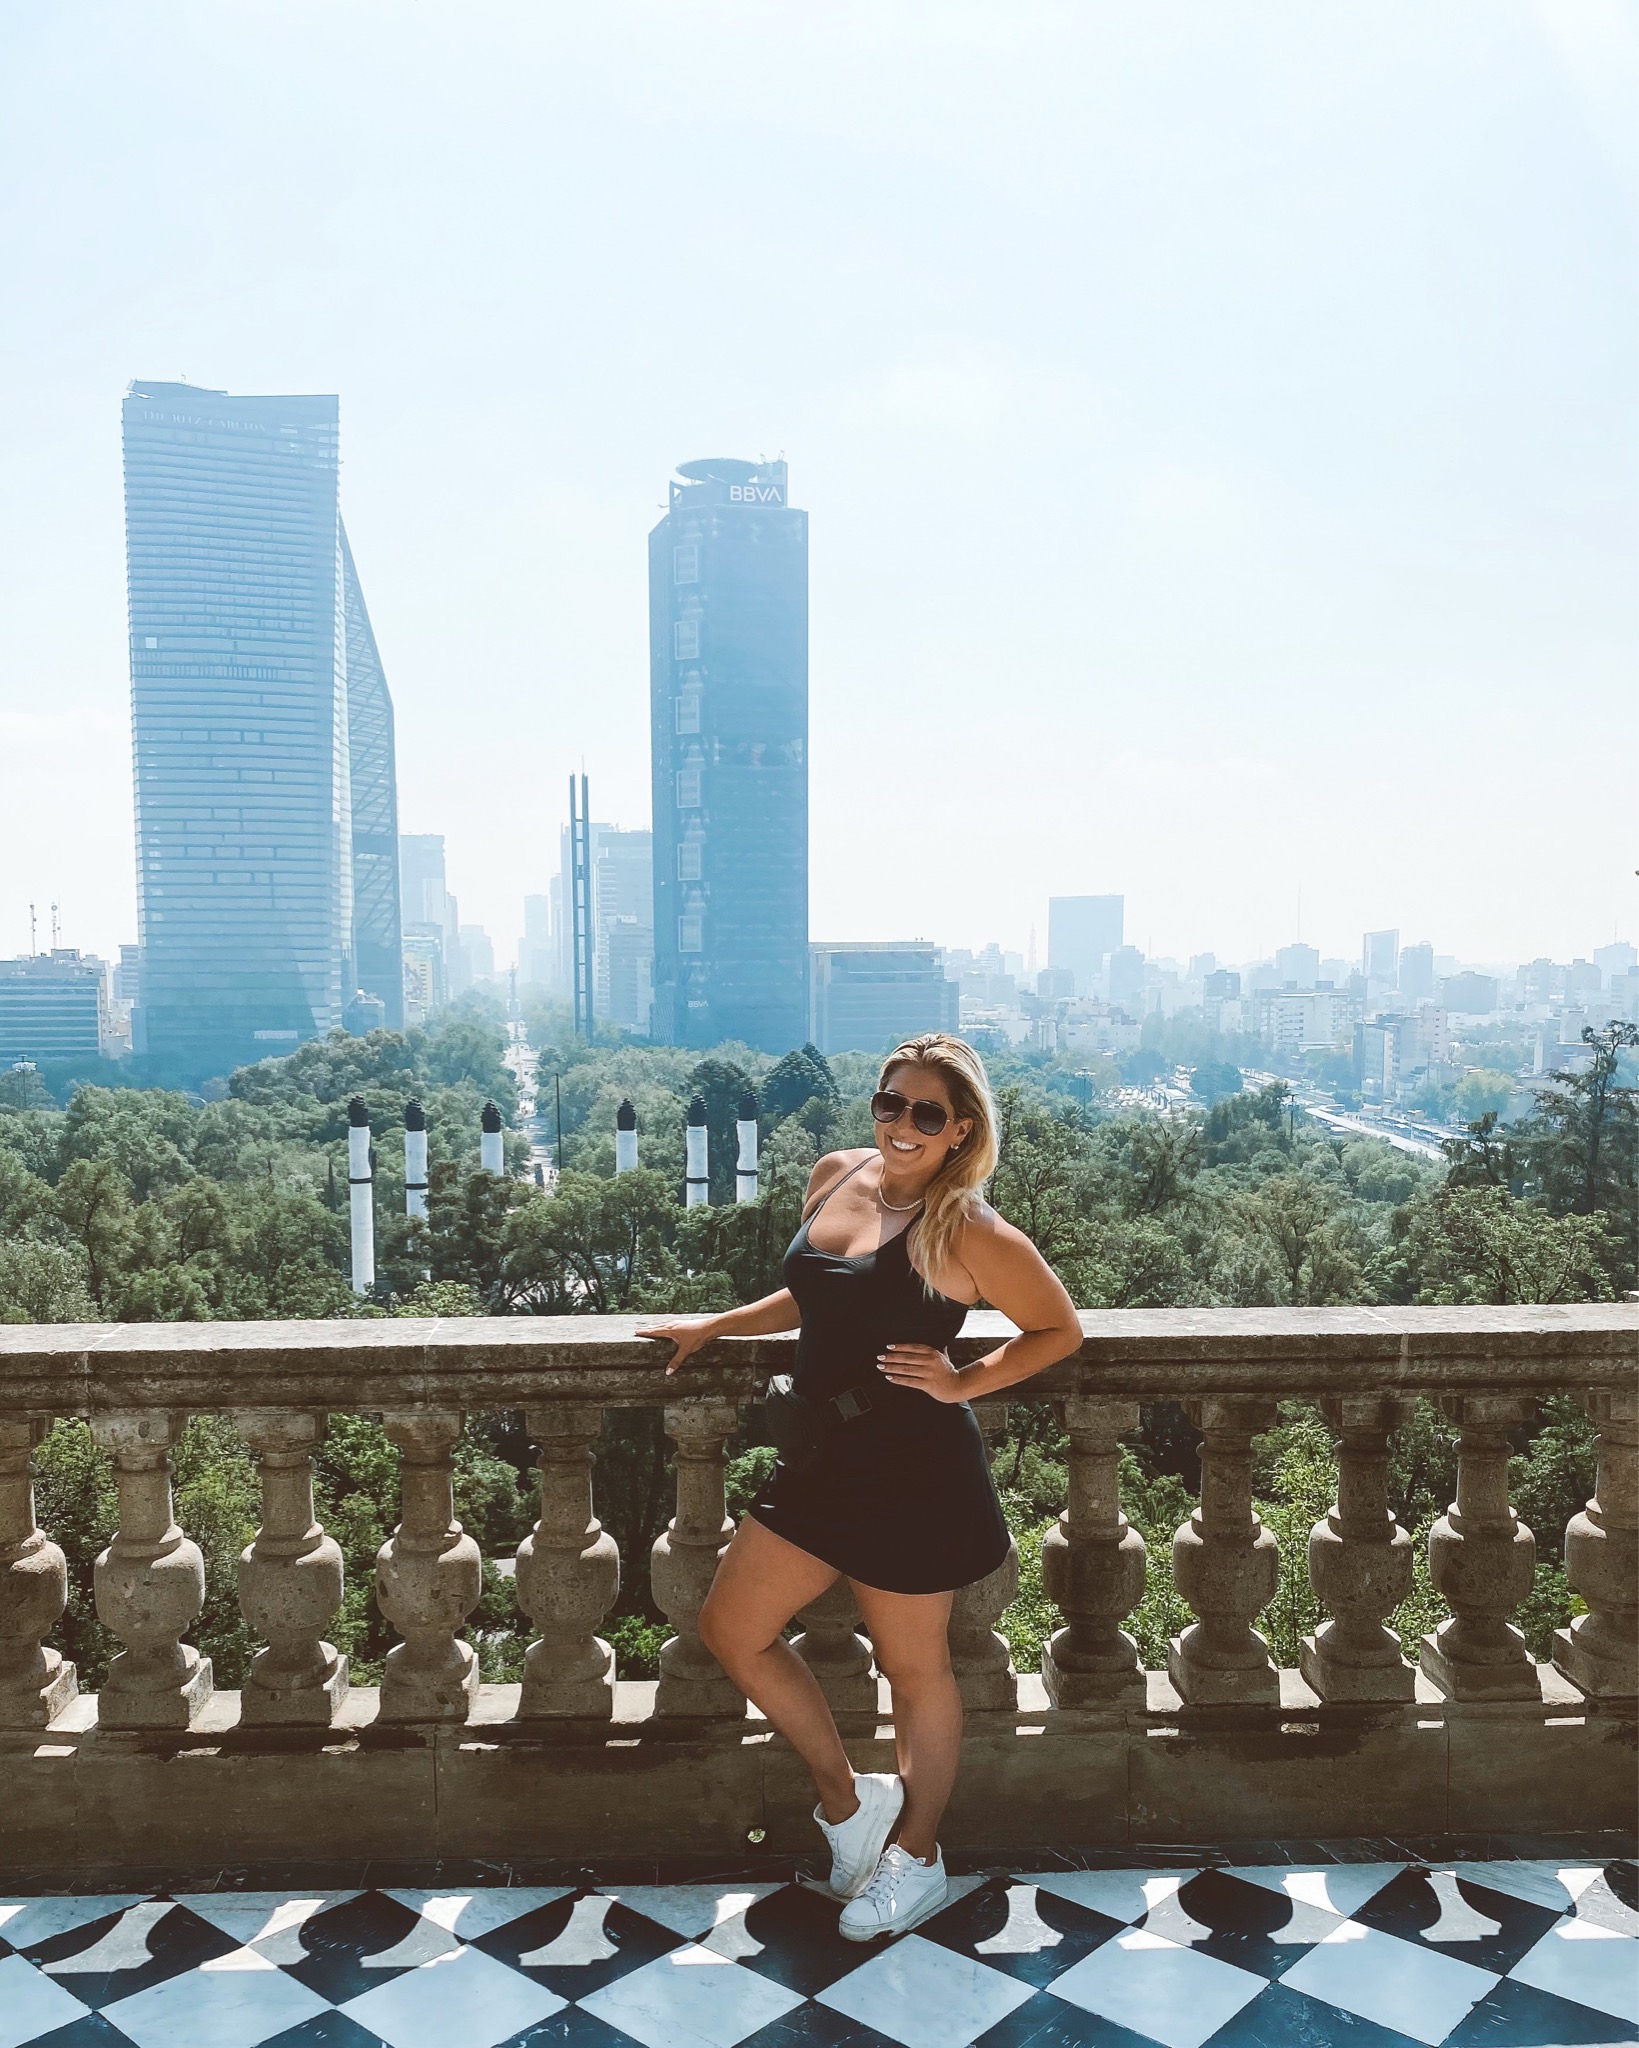 Katwalksf in Mexico City wearing the Outdoor Voices dress, Outdoor Voices Exercise Dress Review